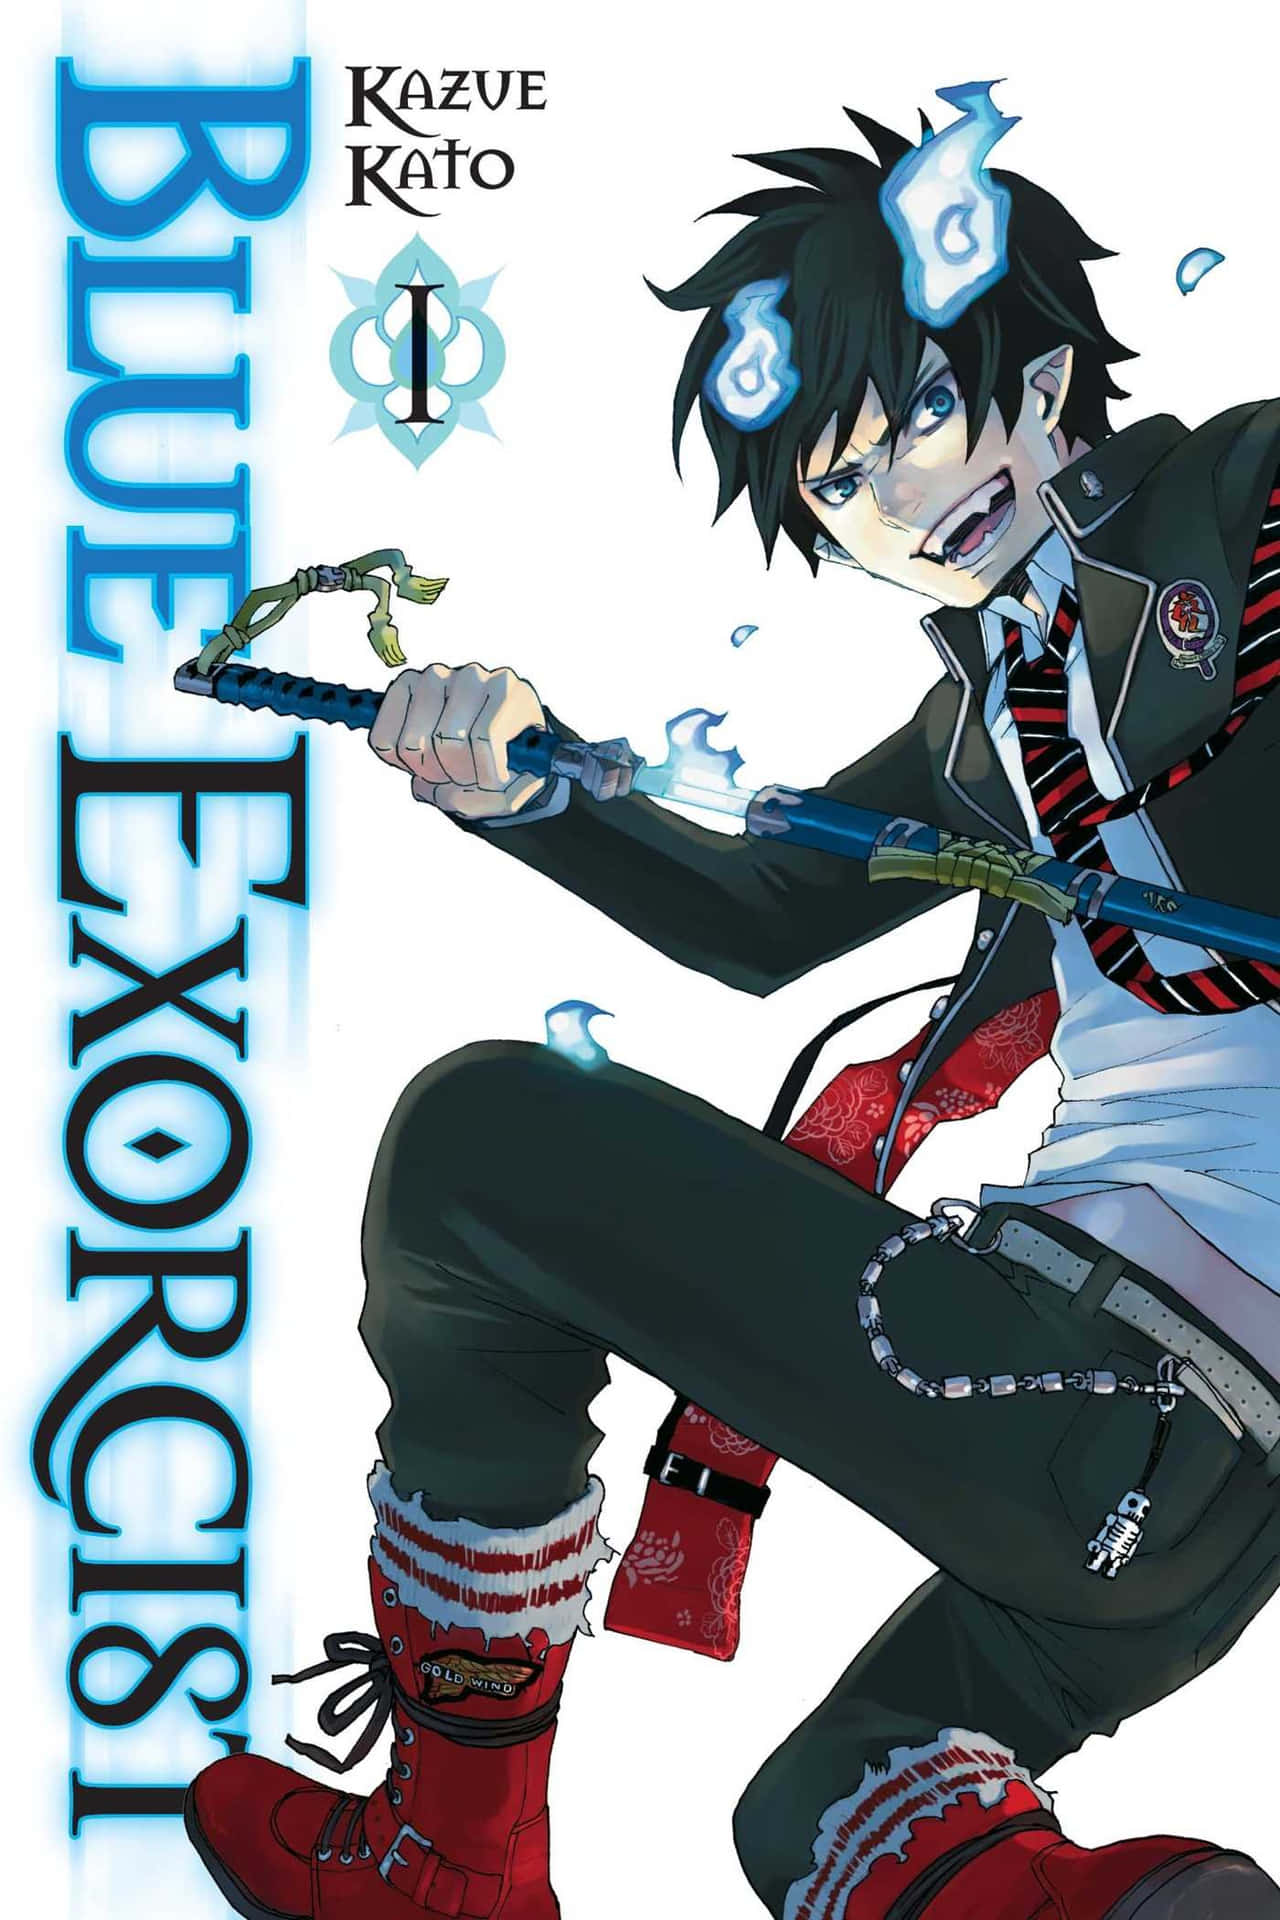 Rin, the main protagonist of Blue Exorcist